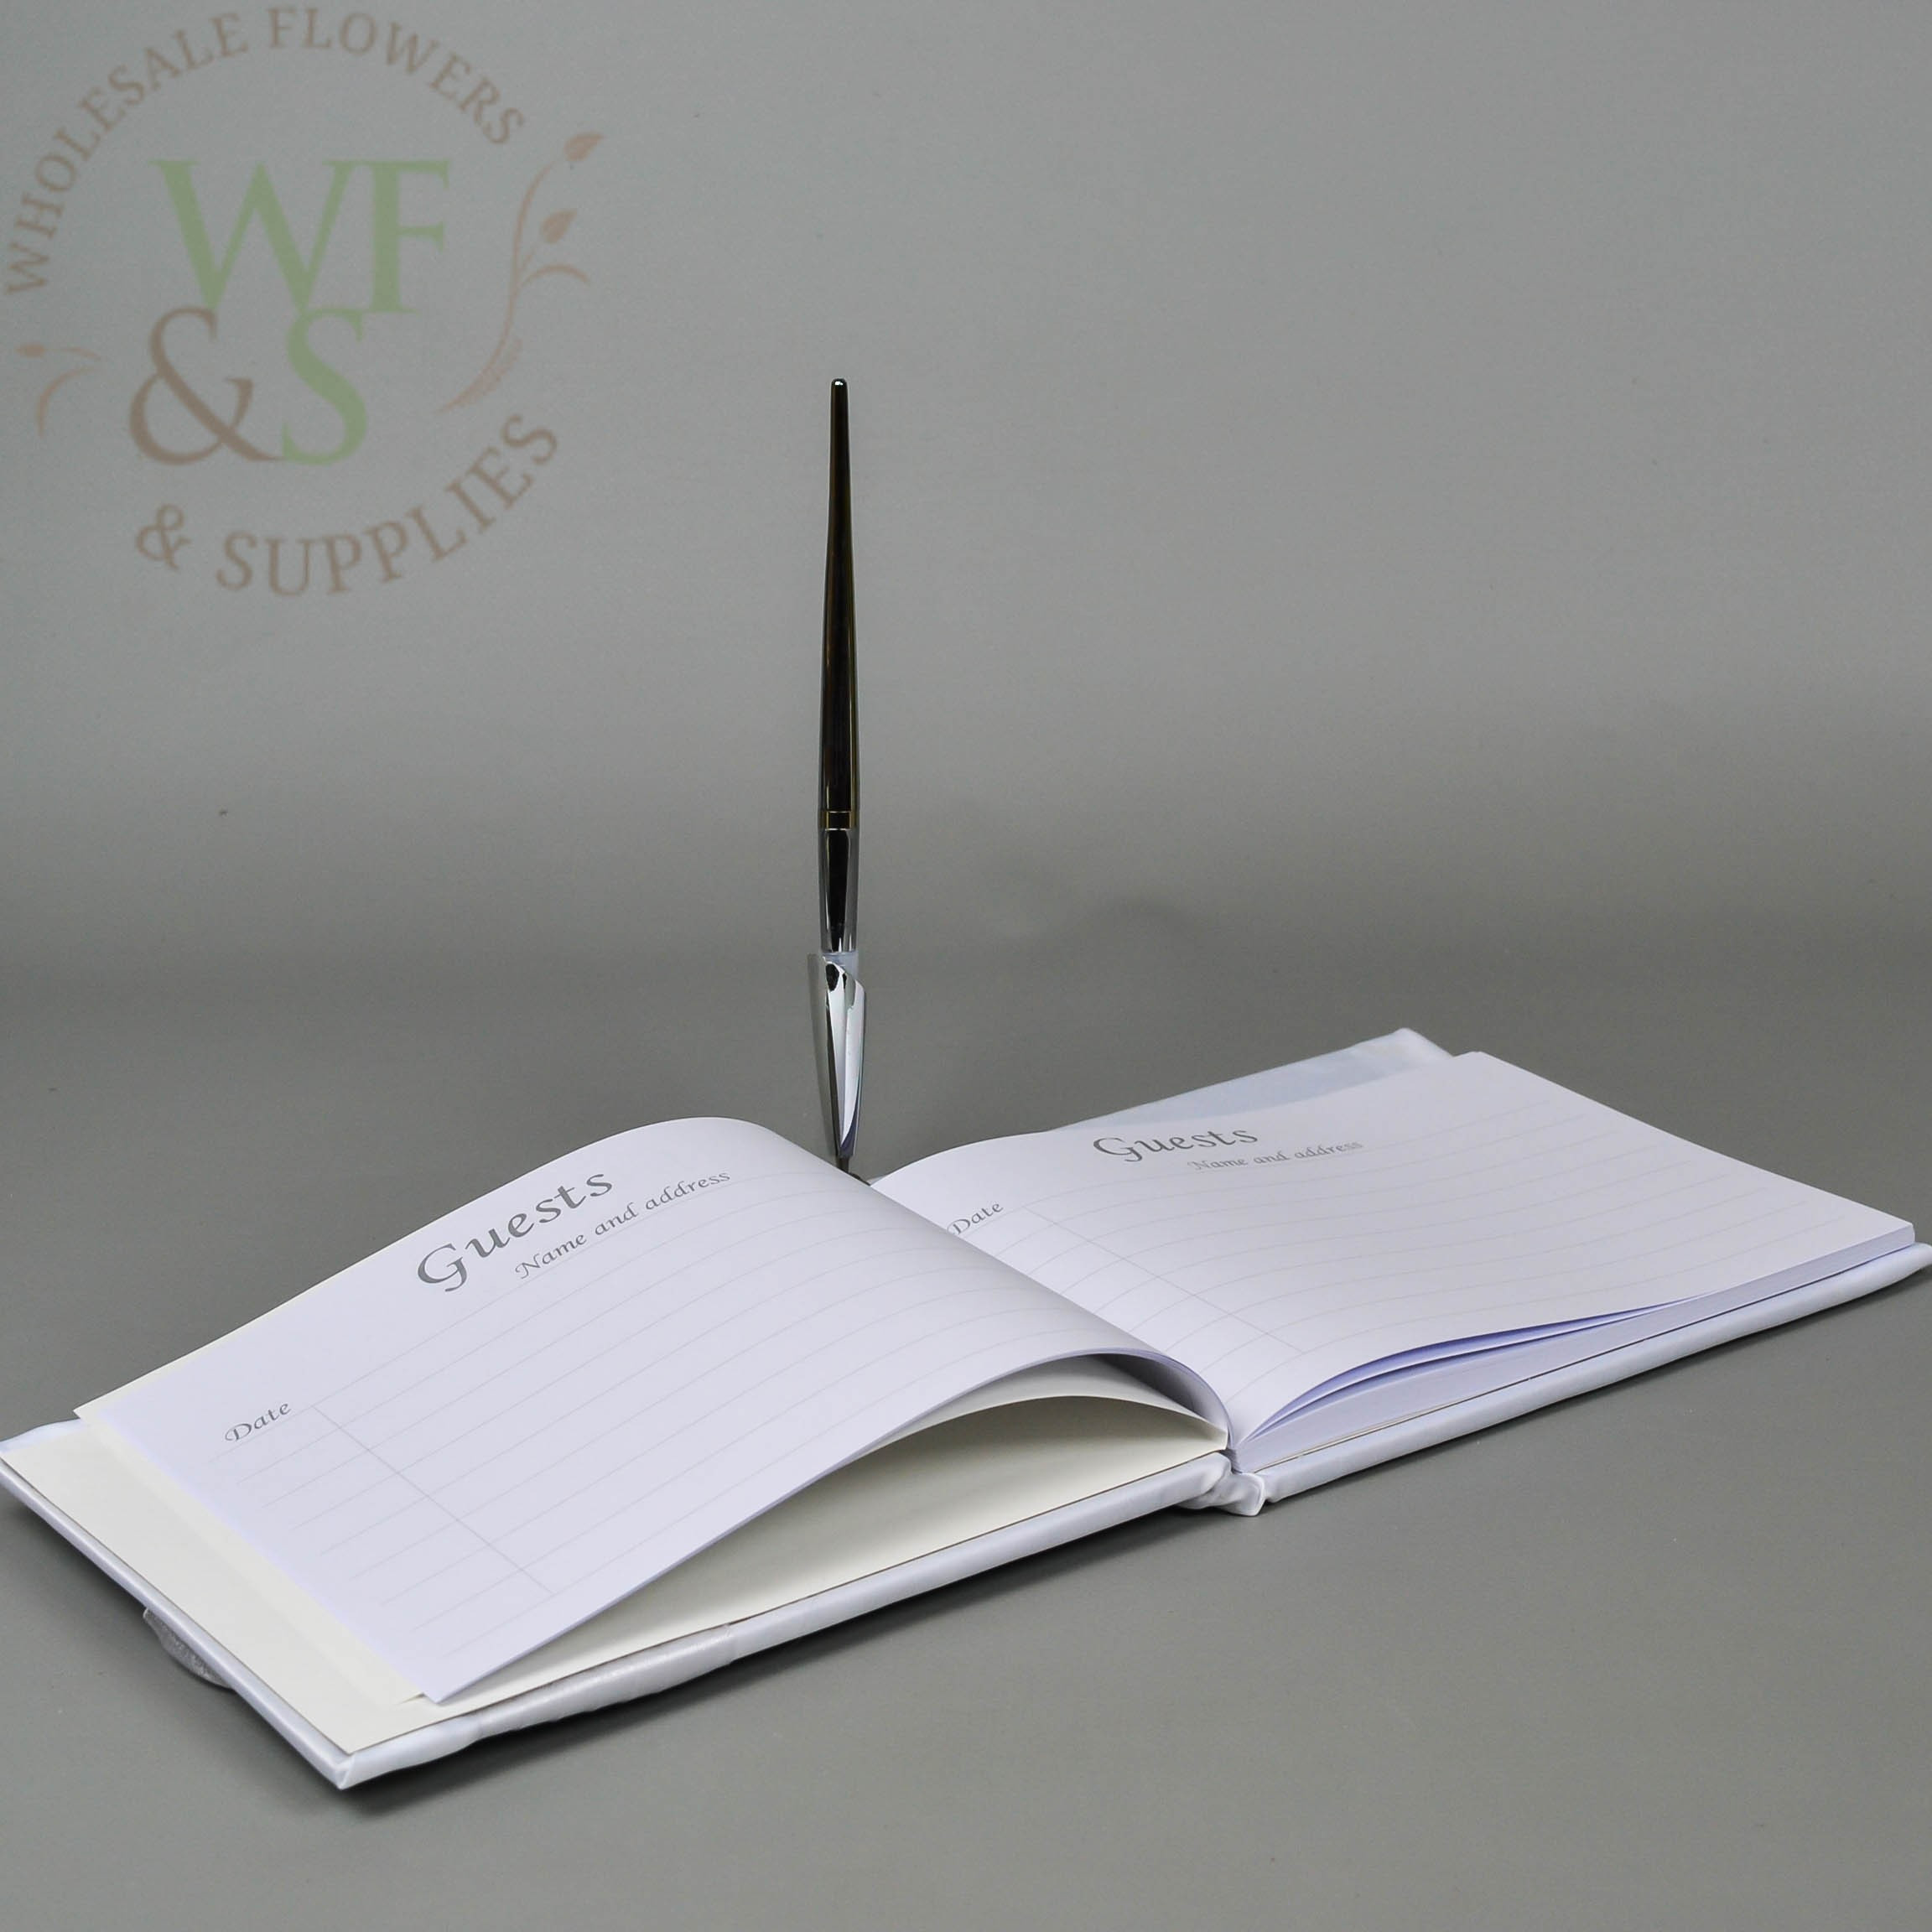 Wedding Guest Book With Pen
 Wedding Guest Book & Pen Set Wholesale Flowers and Supplies